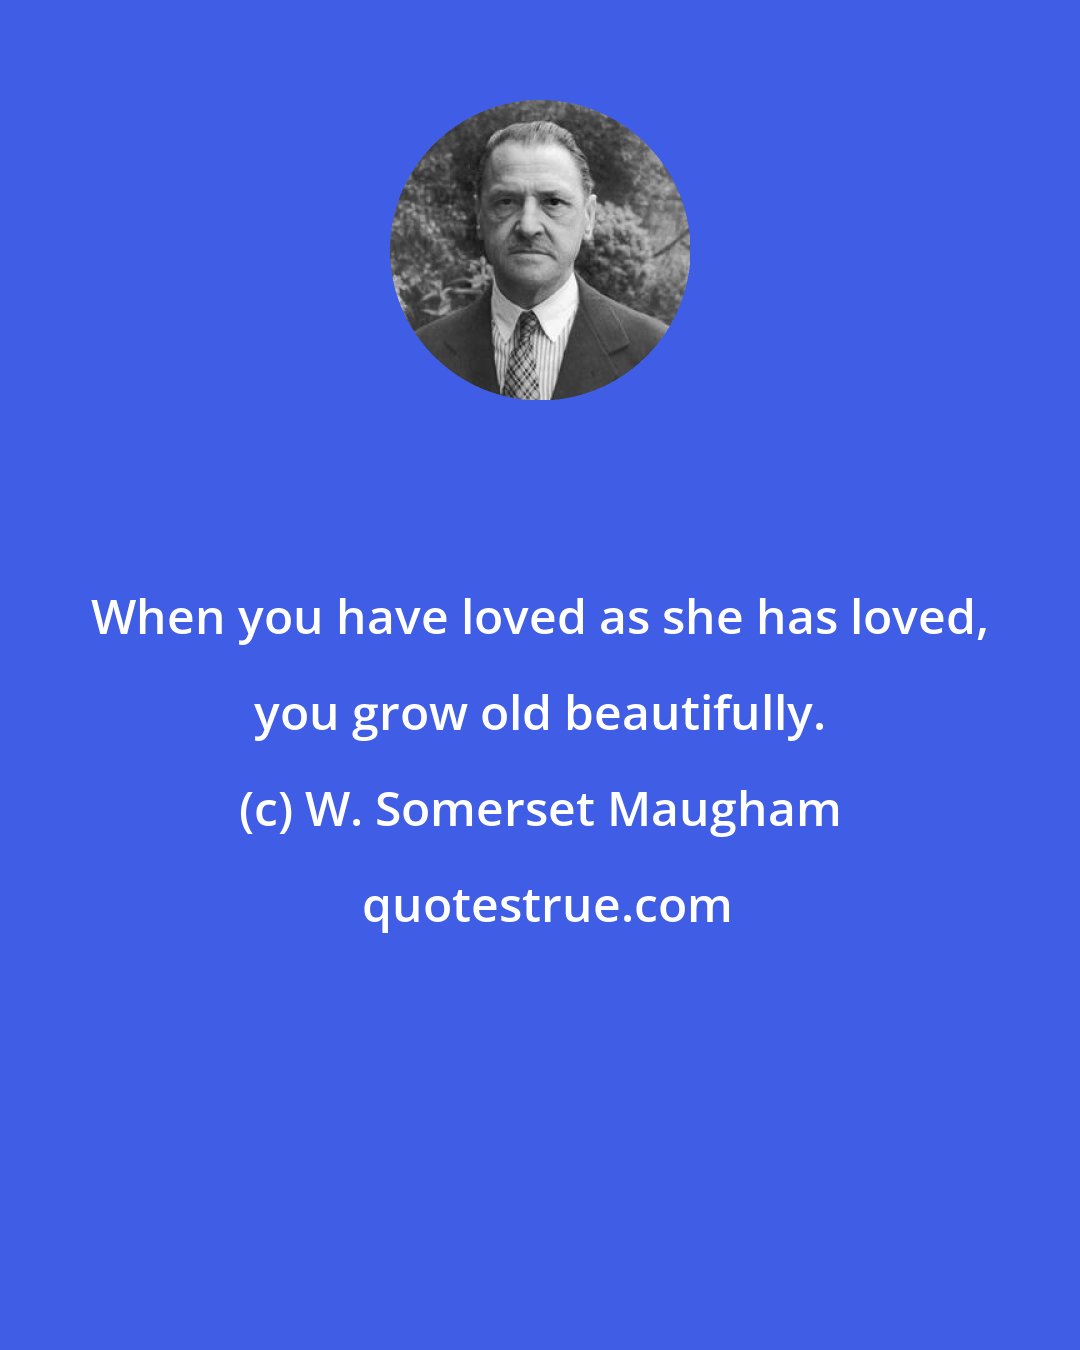 W. Somerset Maugham: When you have loved as she has loved, you grow old beautifully.